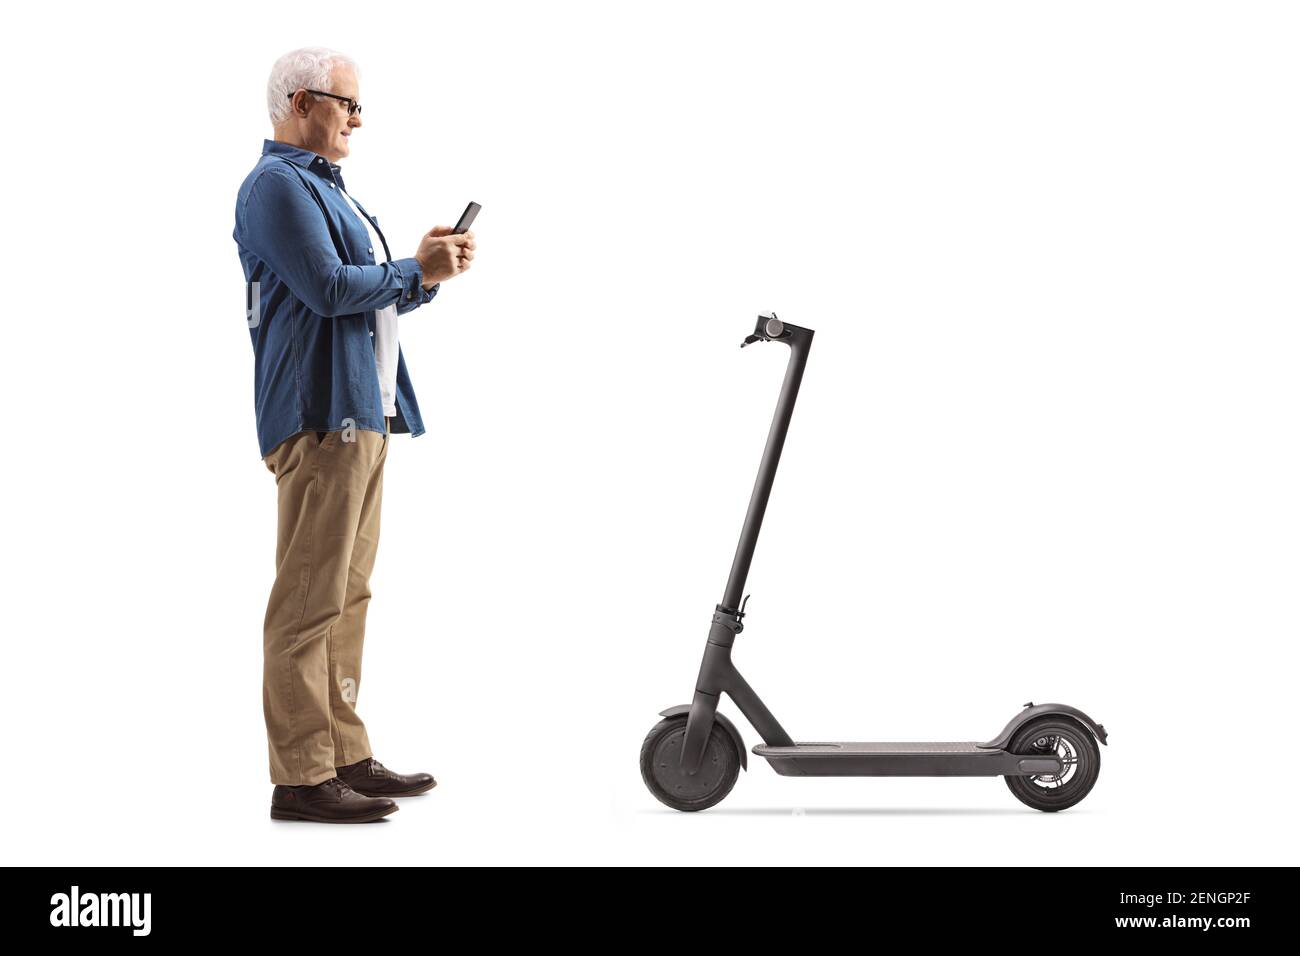 Full length profile shot of a mature man renting an electric scooter through a mobile phone application isolated on white background Stock Photo